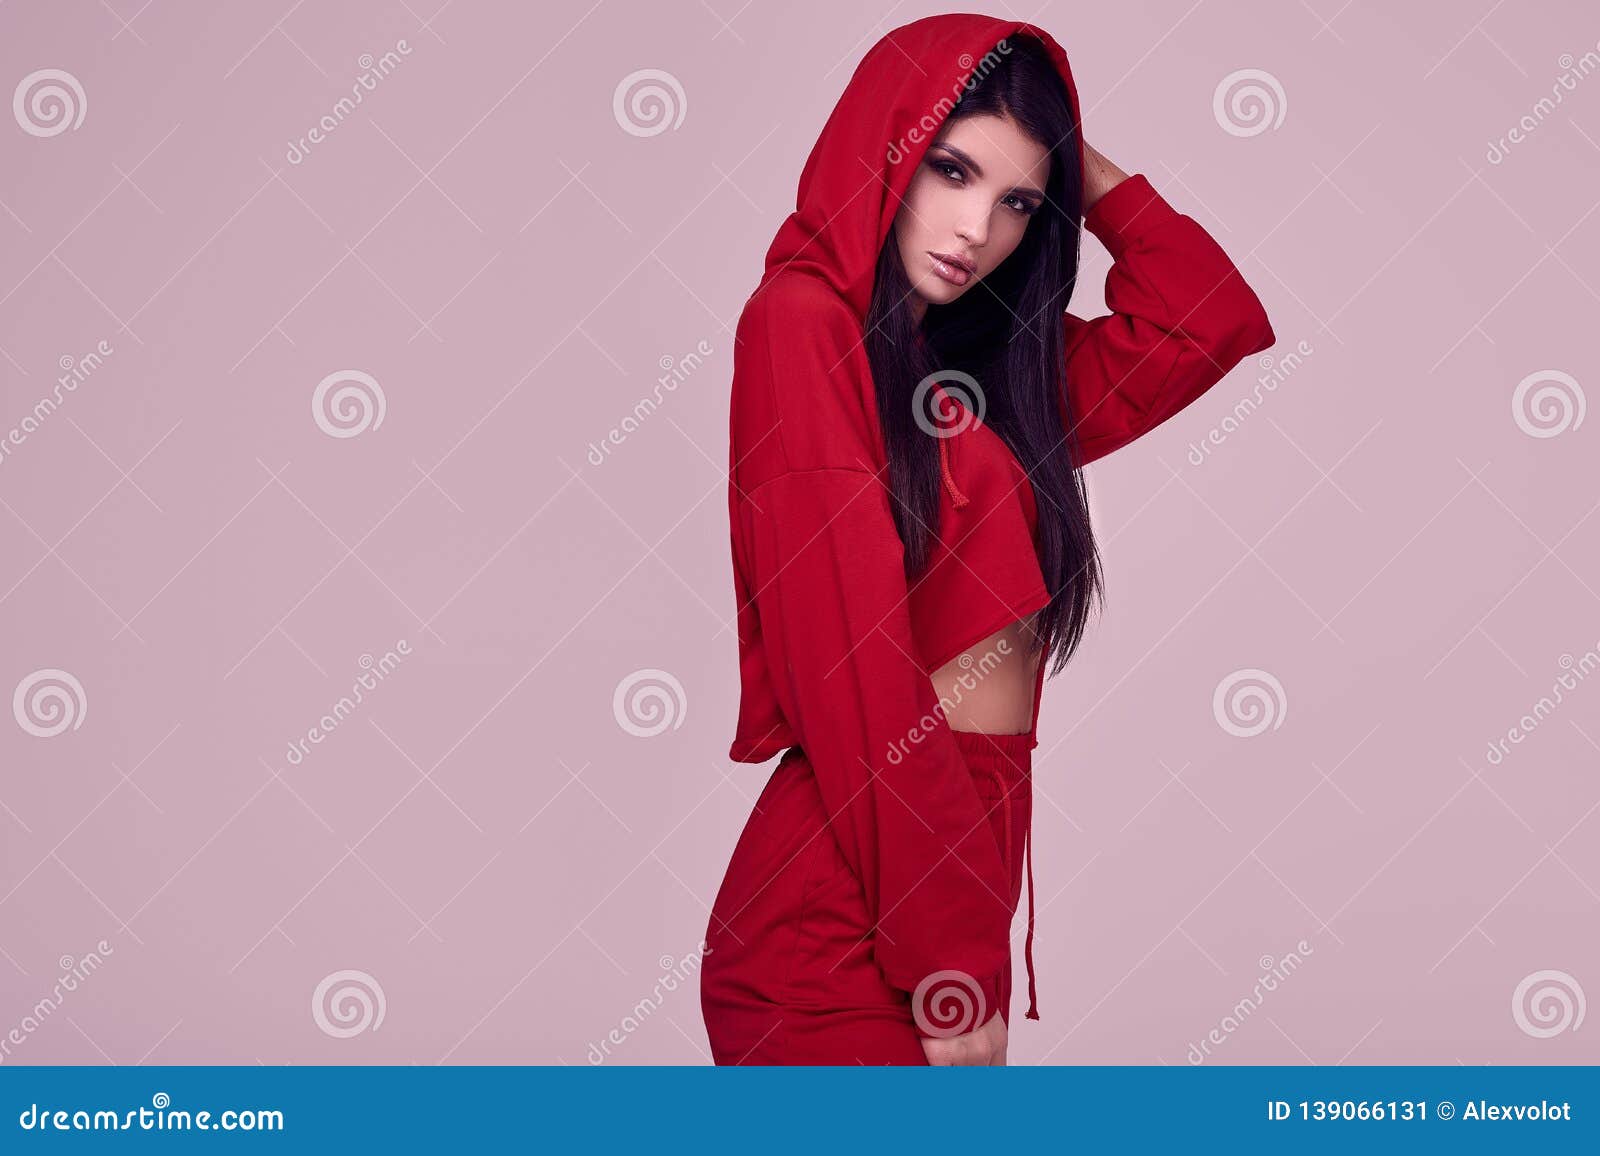 Gorgeous Brunette Woman in Fashion Red Hoodie in Studio Stock Image ...